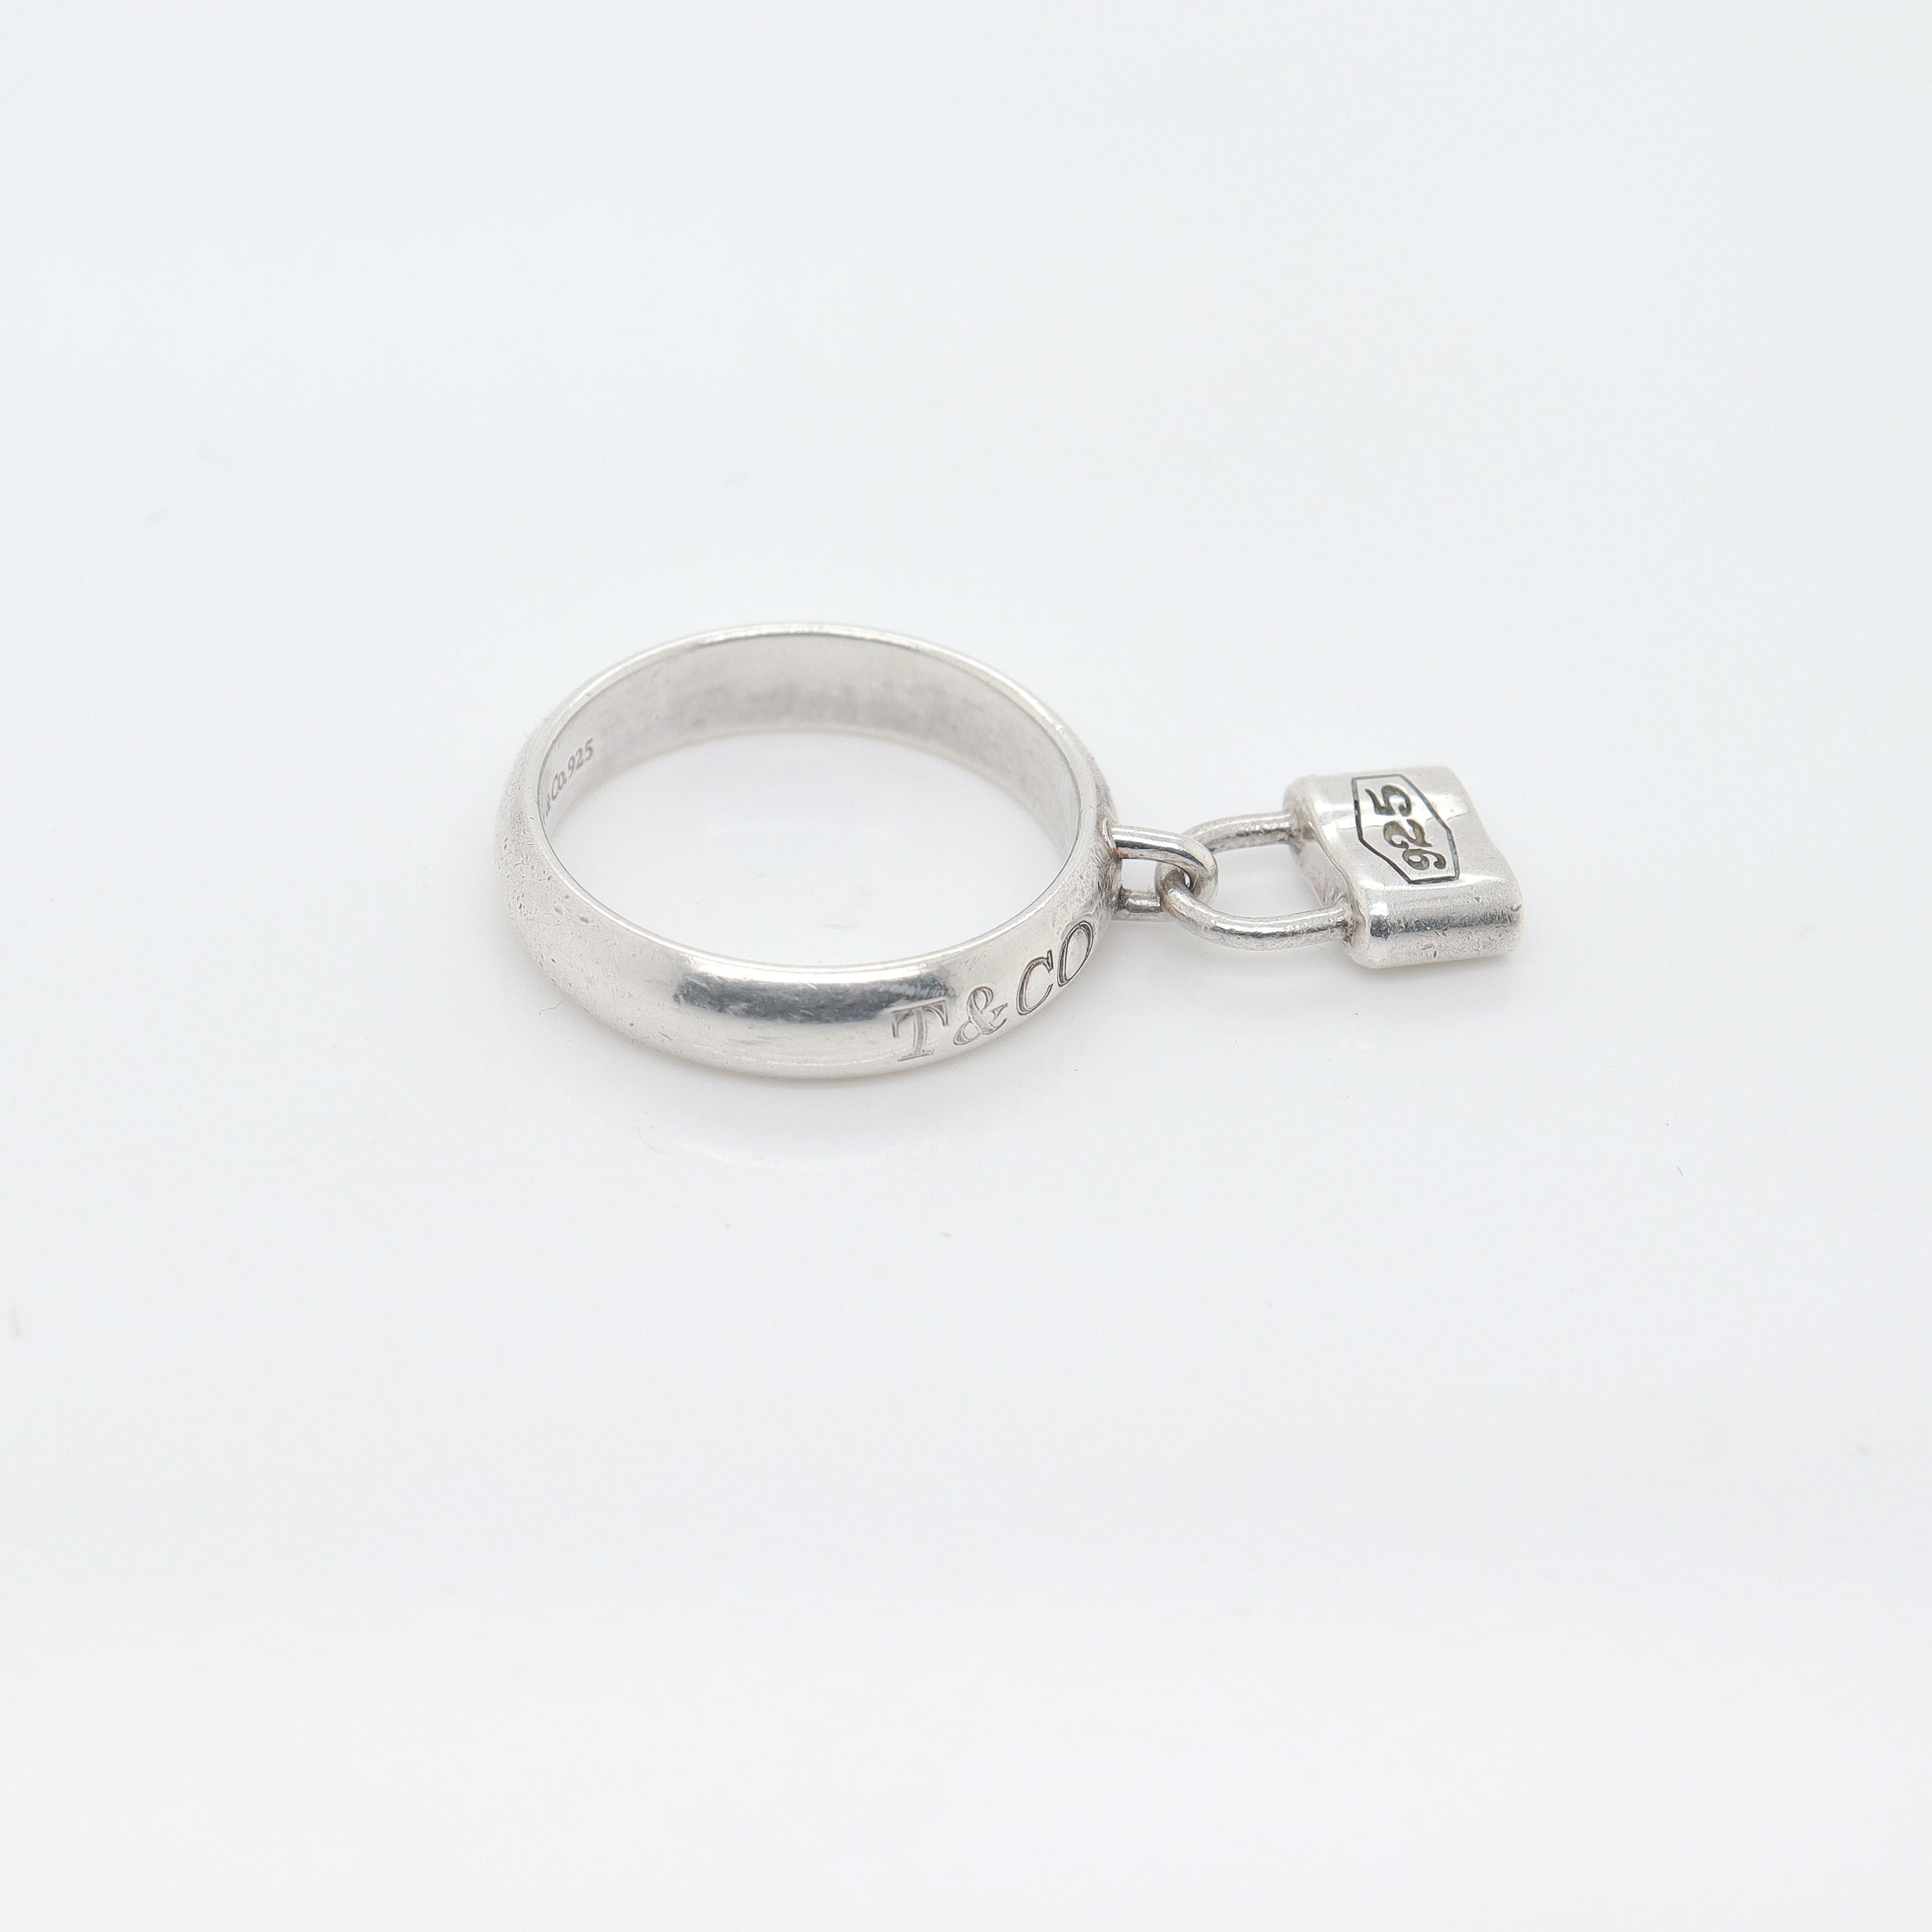 Tiffany & Co Sterling Silver 1837 Lock Charm Band Ring 3